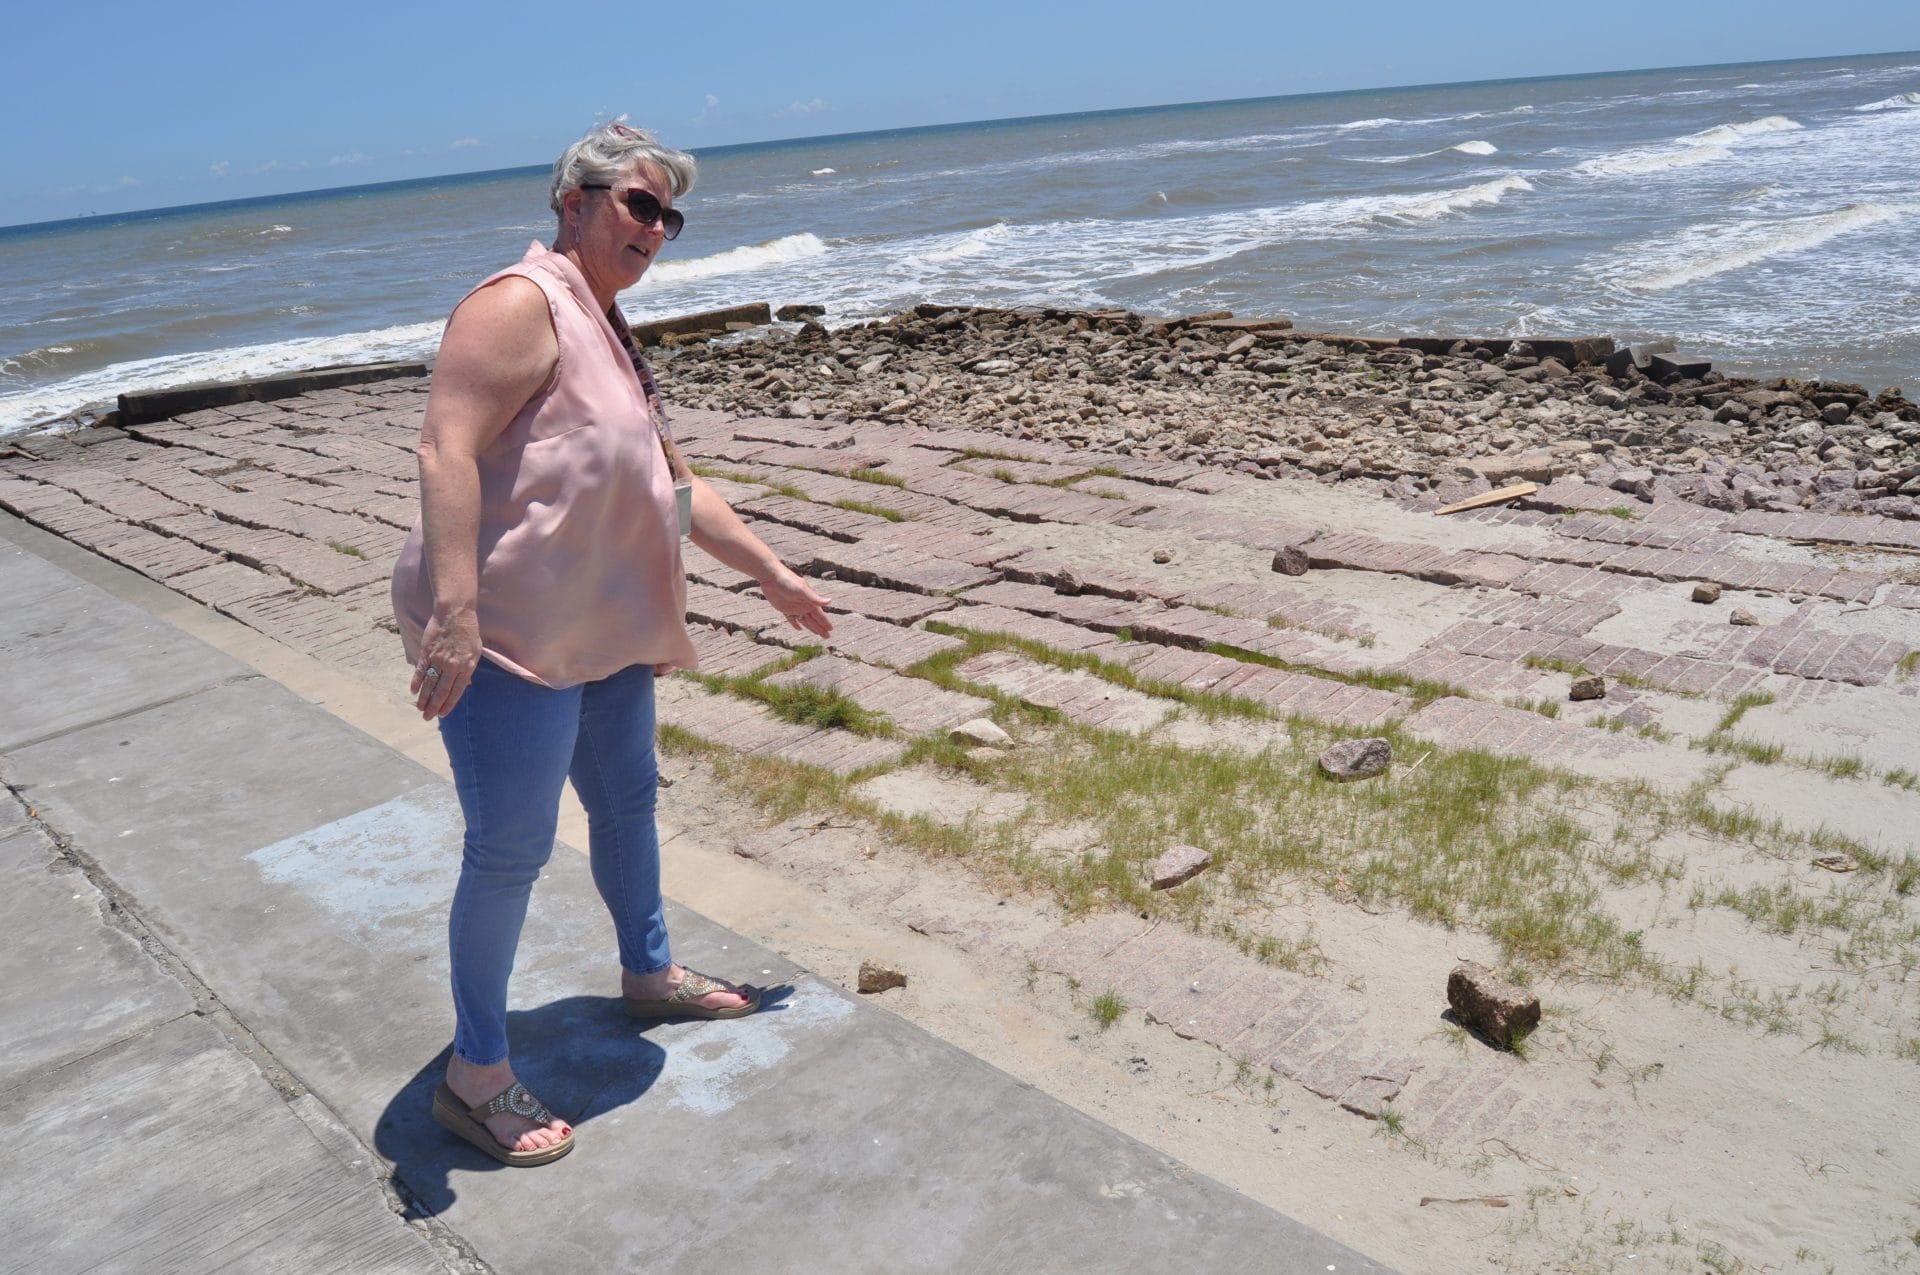 Kelly Burks-Copes near the site of Fort San Jacinto in Galveston, TX. Burks-Copes is leading the effort to build the Ike Dike defense against floodwaters. (Tristan Baurick)